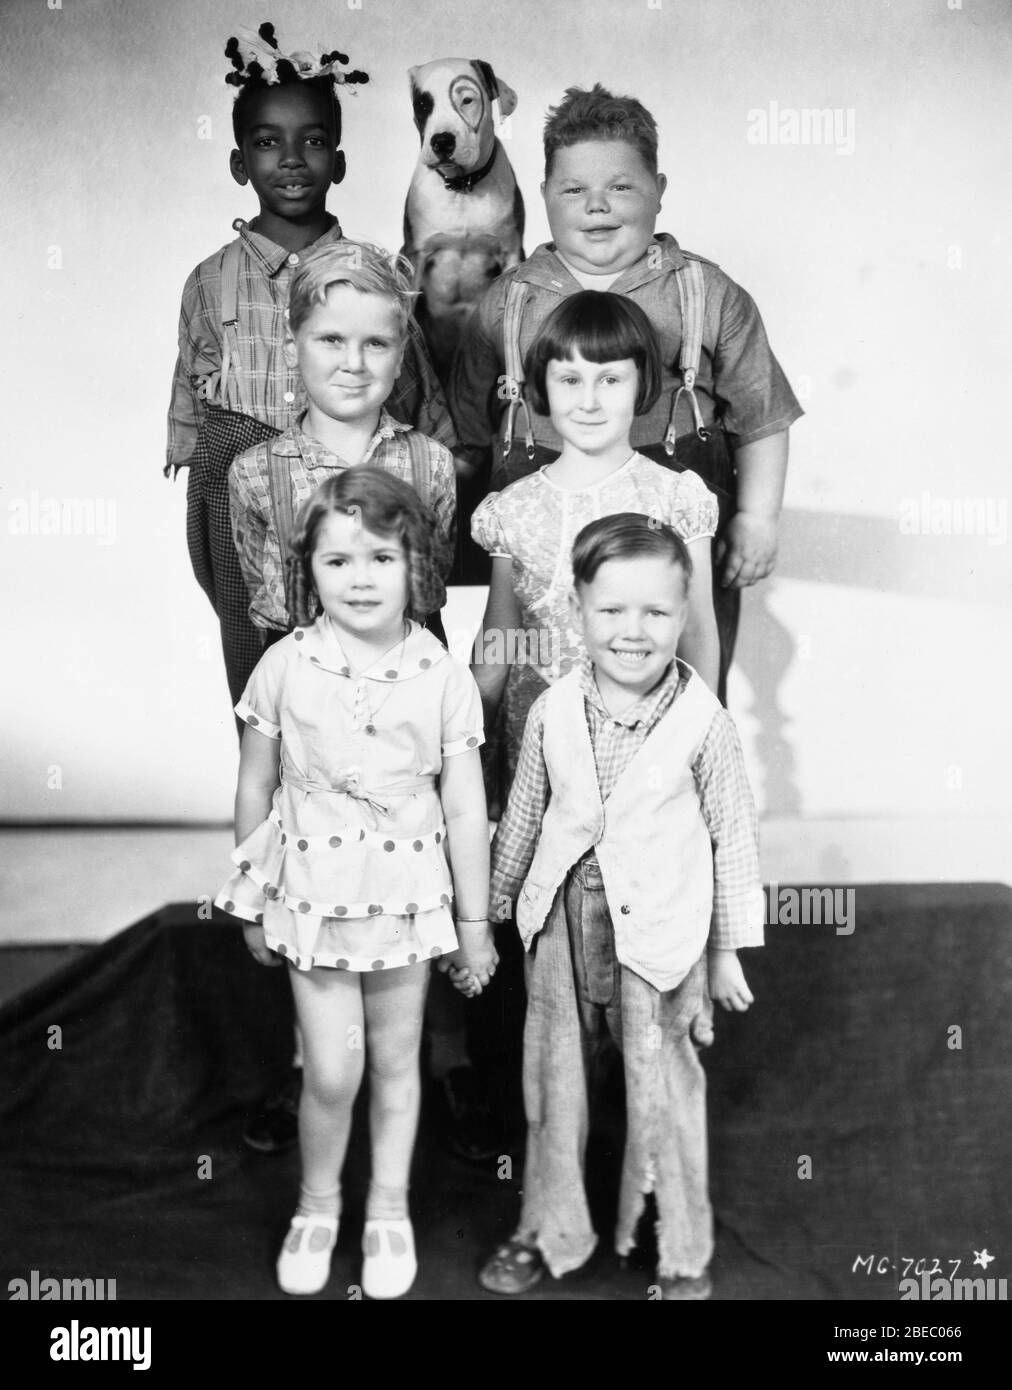 OUR GANG 1930 Group Portrait with (from top) ALLEN '' FARINA '' HOSKINS PETE the DOG NORMAN '' CHUBBY '' CHANEY  JACKIE COOPER MARY ANN JACKSON DOROTHY DeBORBA and BOBBY '' WHEEZER '' HUTCHINS director Robert McGowan Hal Roach Studios / Metro Goldwyn Mayer Stock Photo